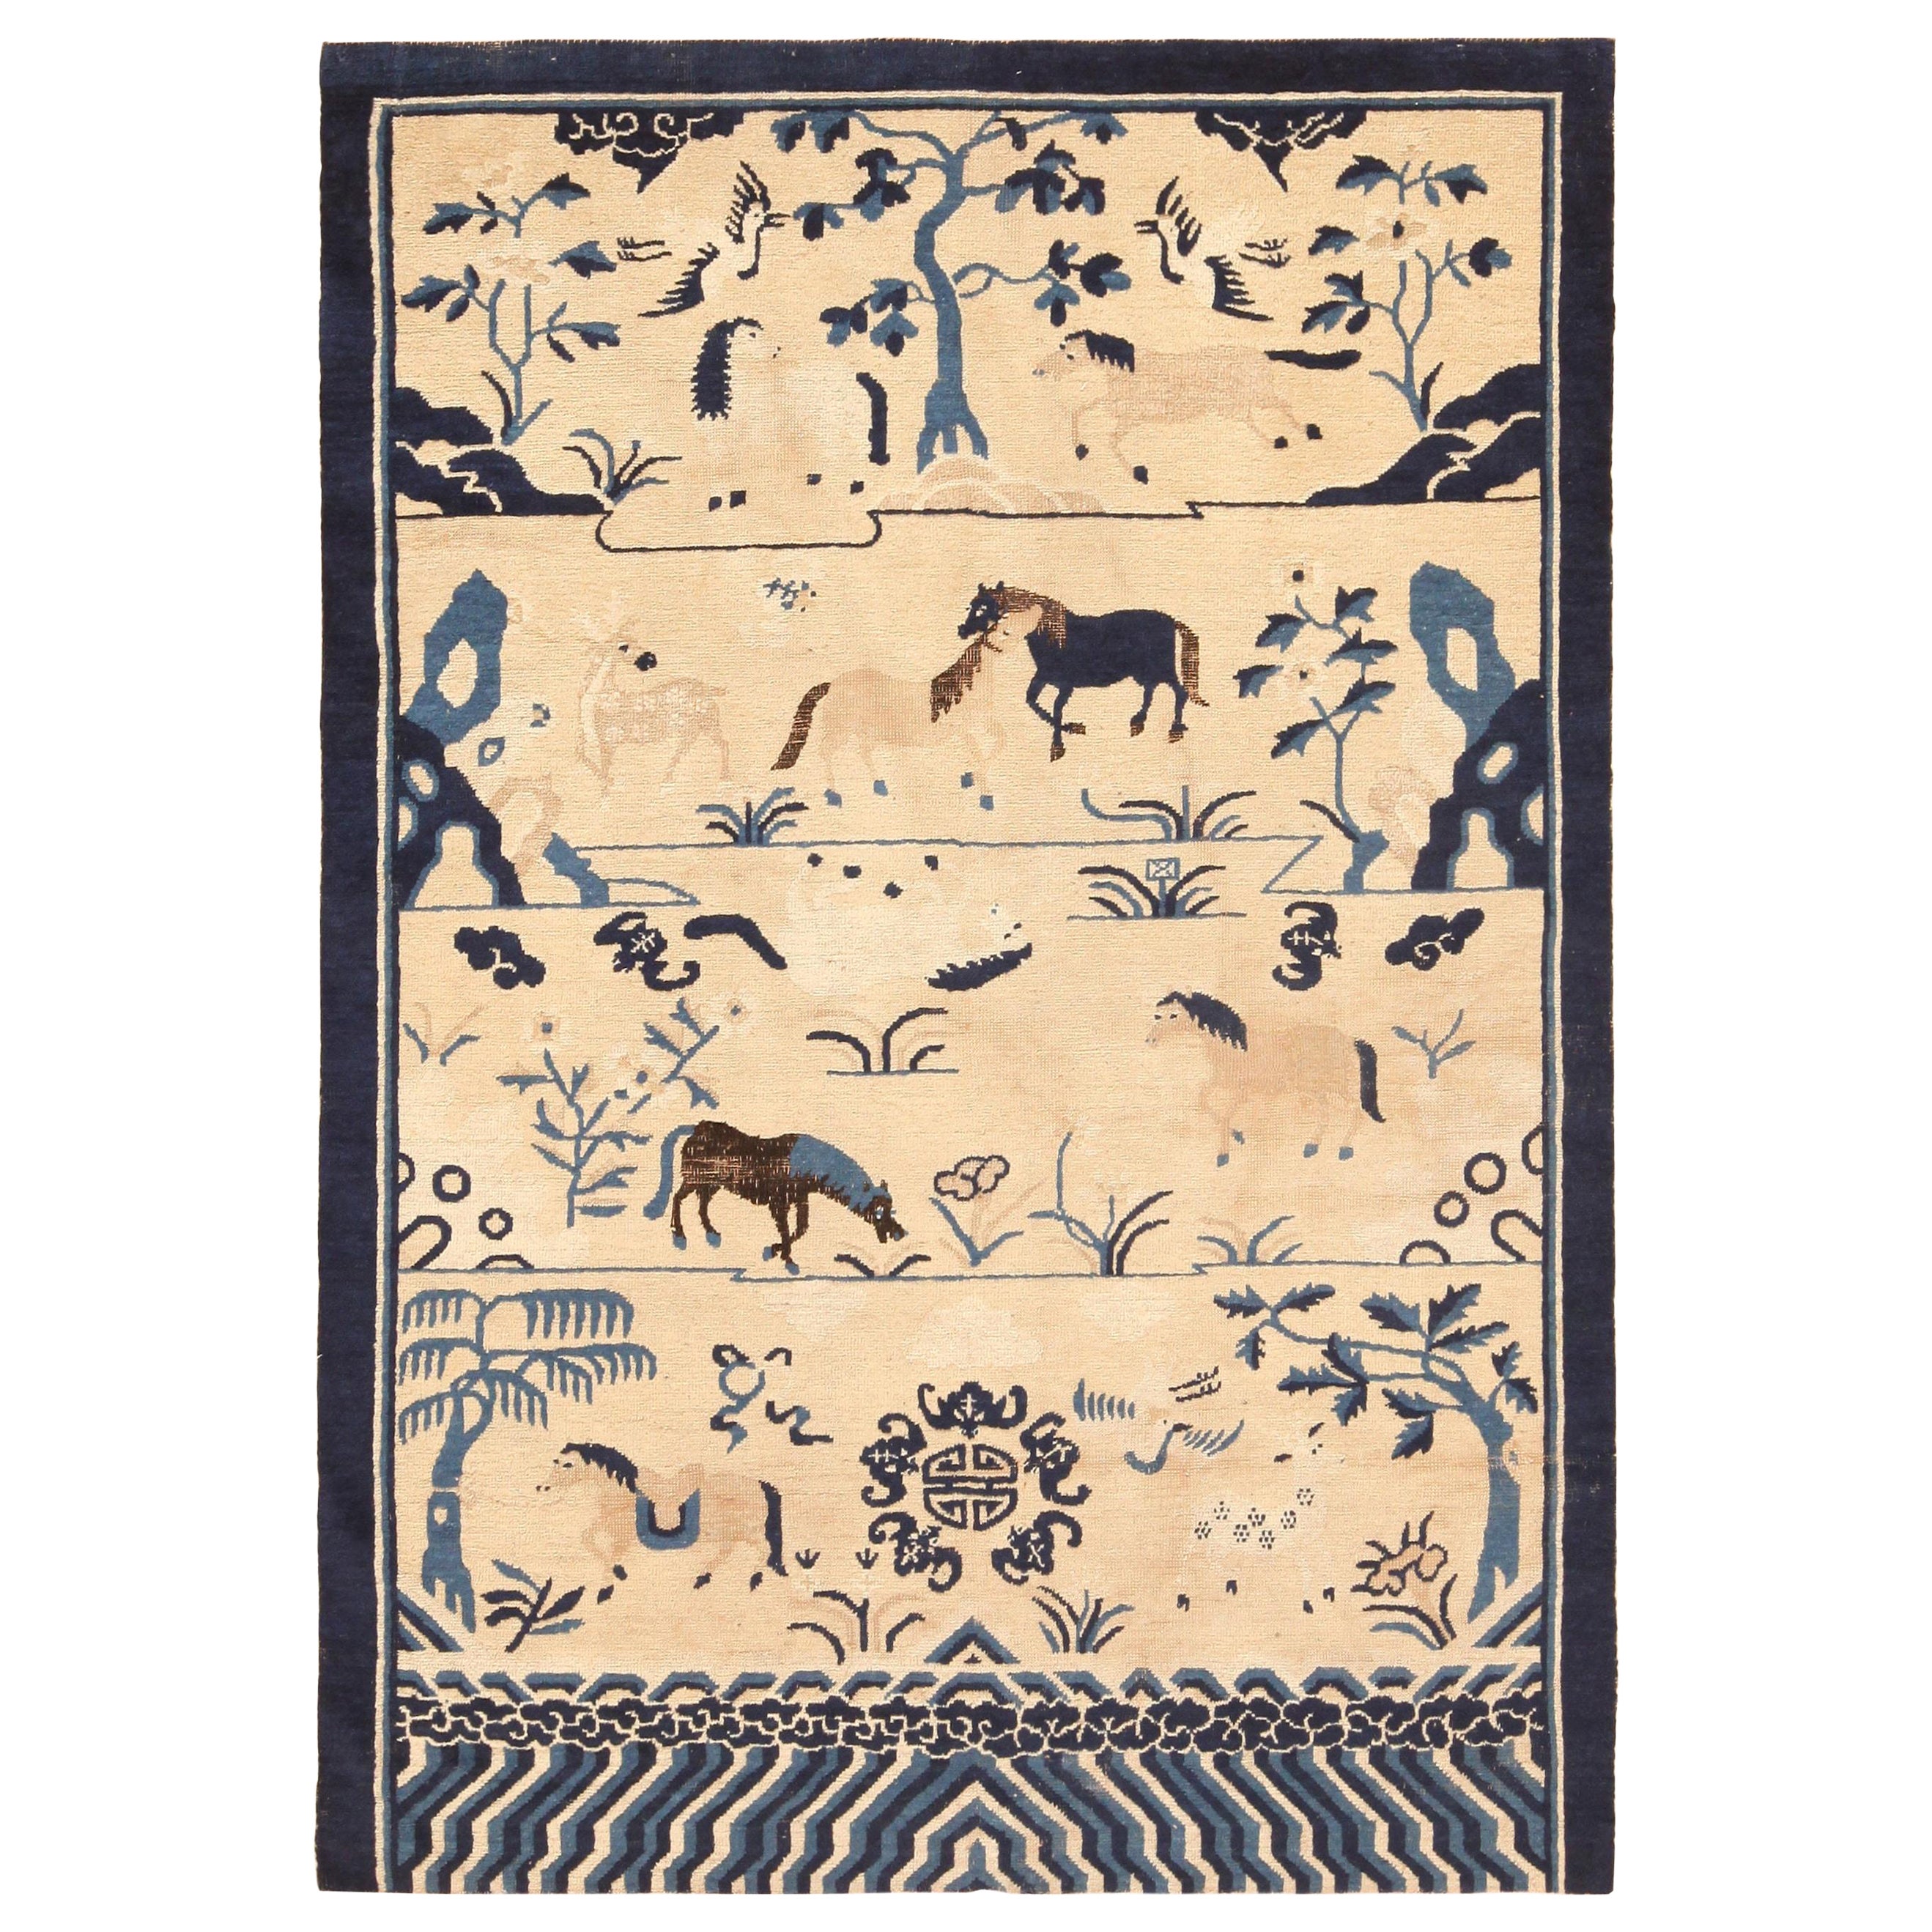 18th Century Antique Chinese Animal Rug. Size: 4 ft 2 in x 5 ft 9 in